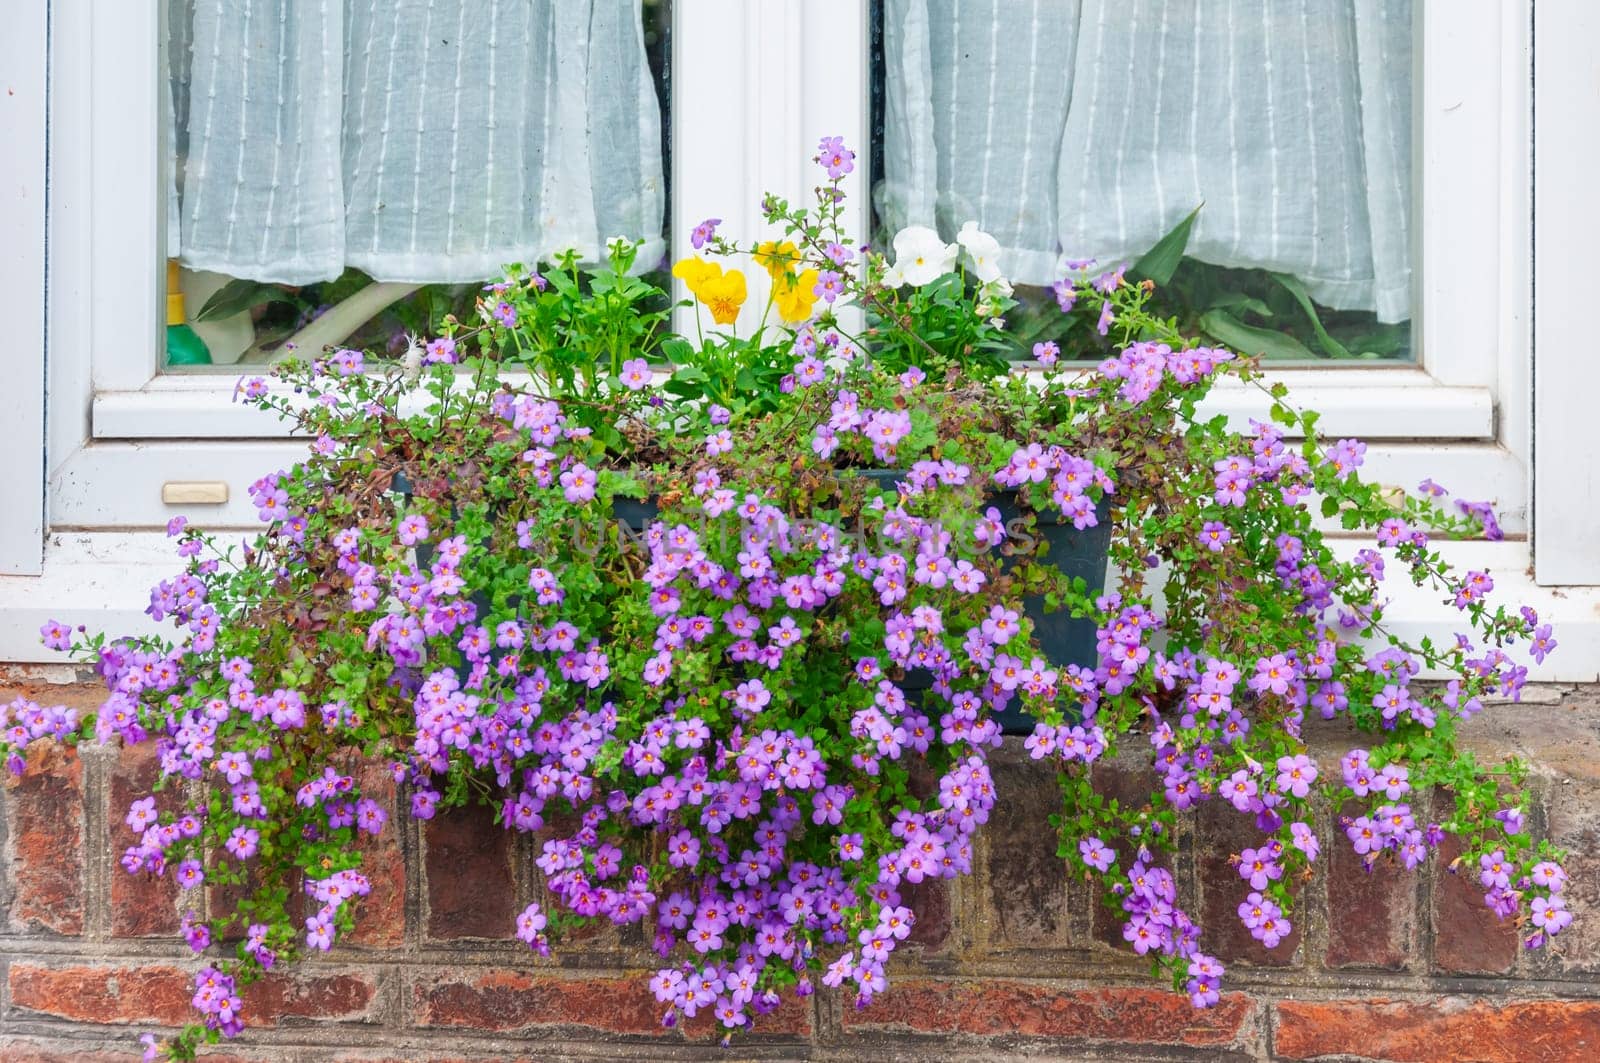 a beautiful flowerpot with purple flowers stands on the window of the house, a close-up of a flower in a flowerpot. High quality photo